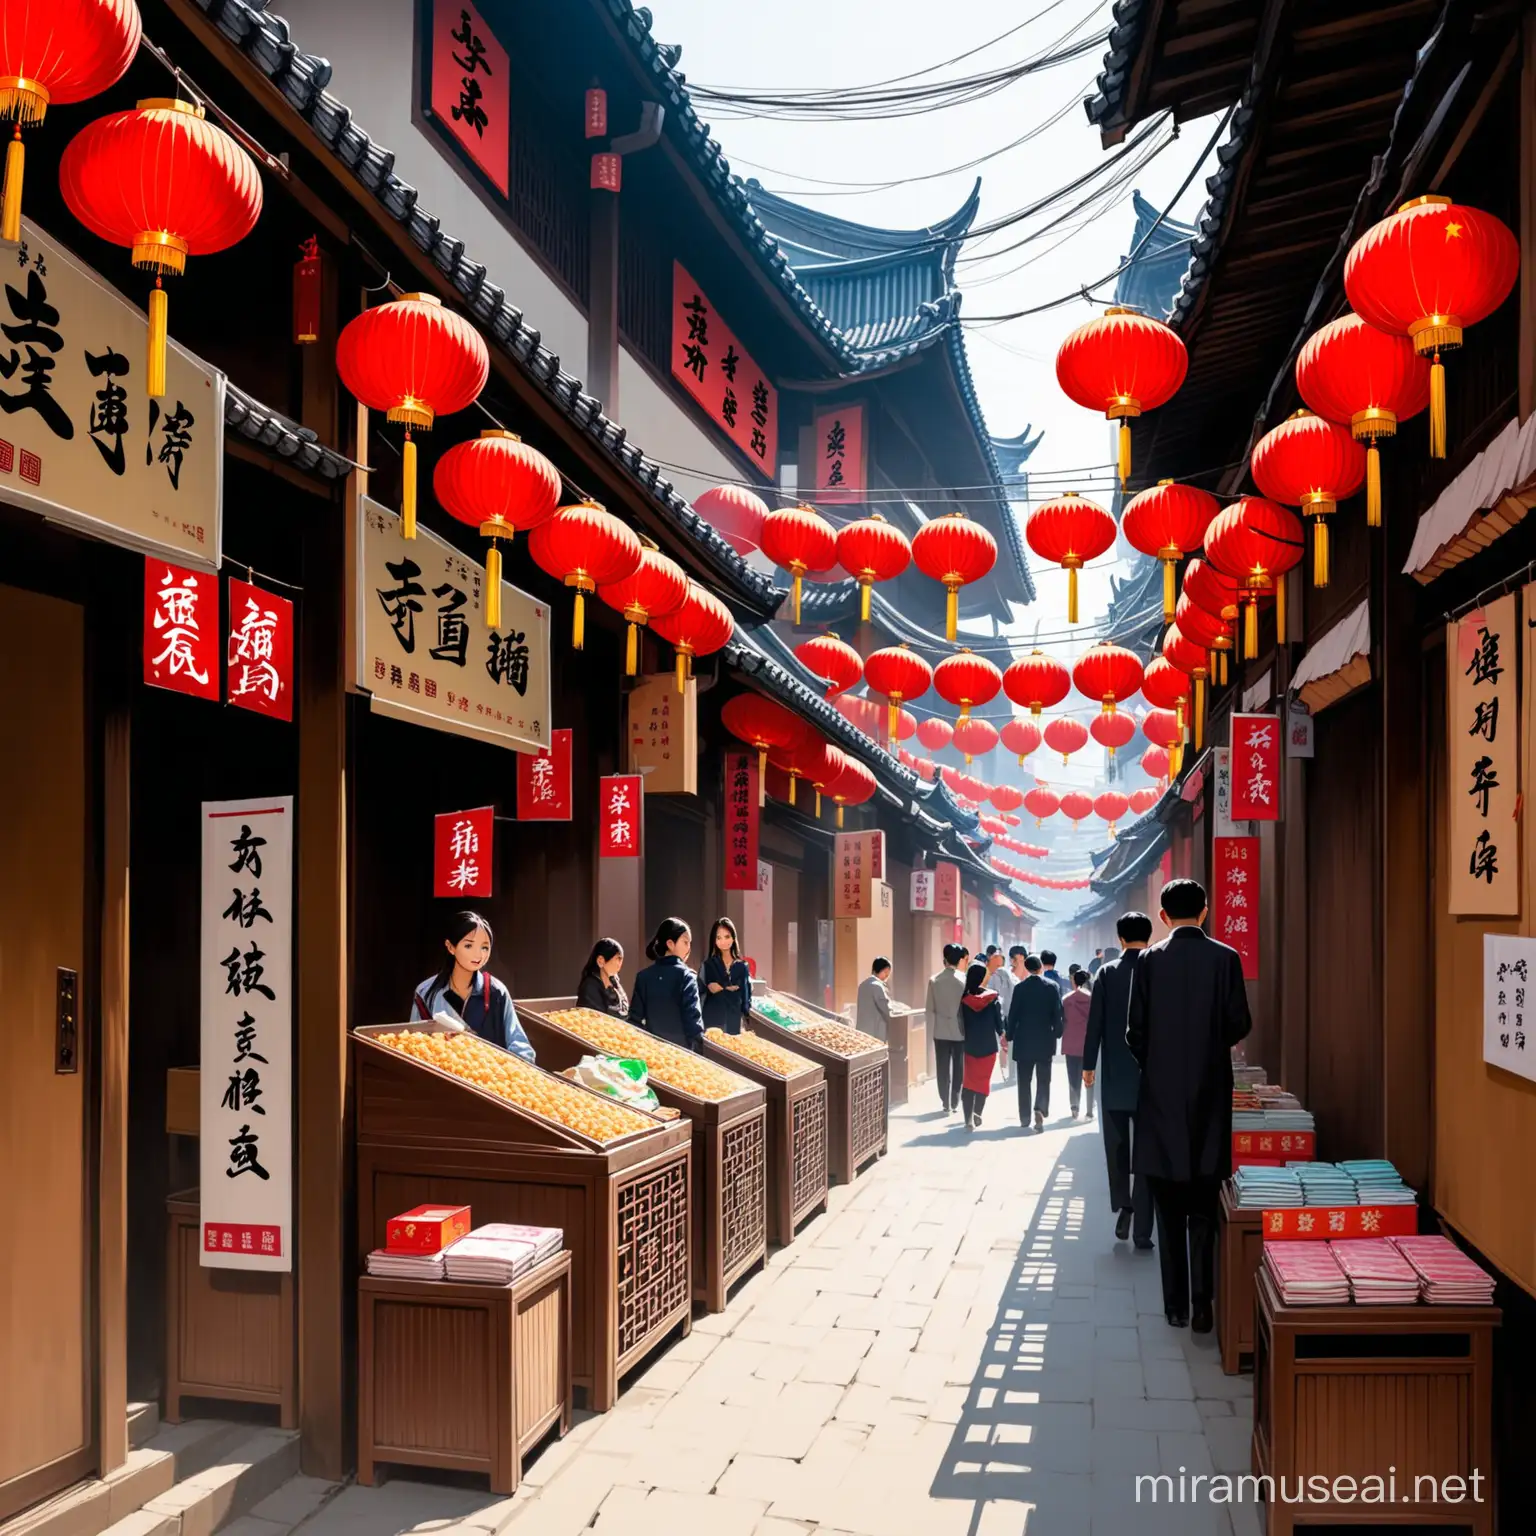 chinese narrow alleyway, many people and many kiosks